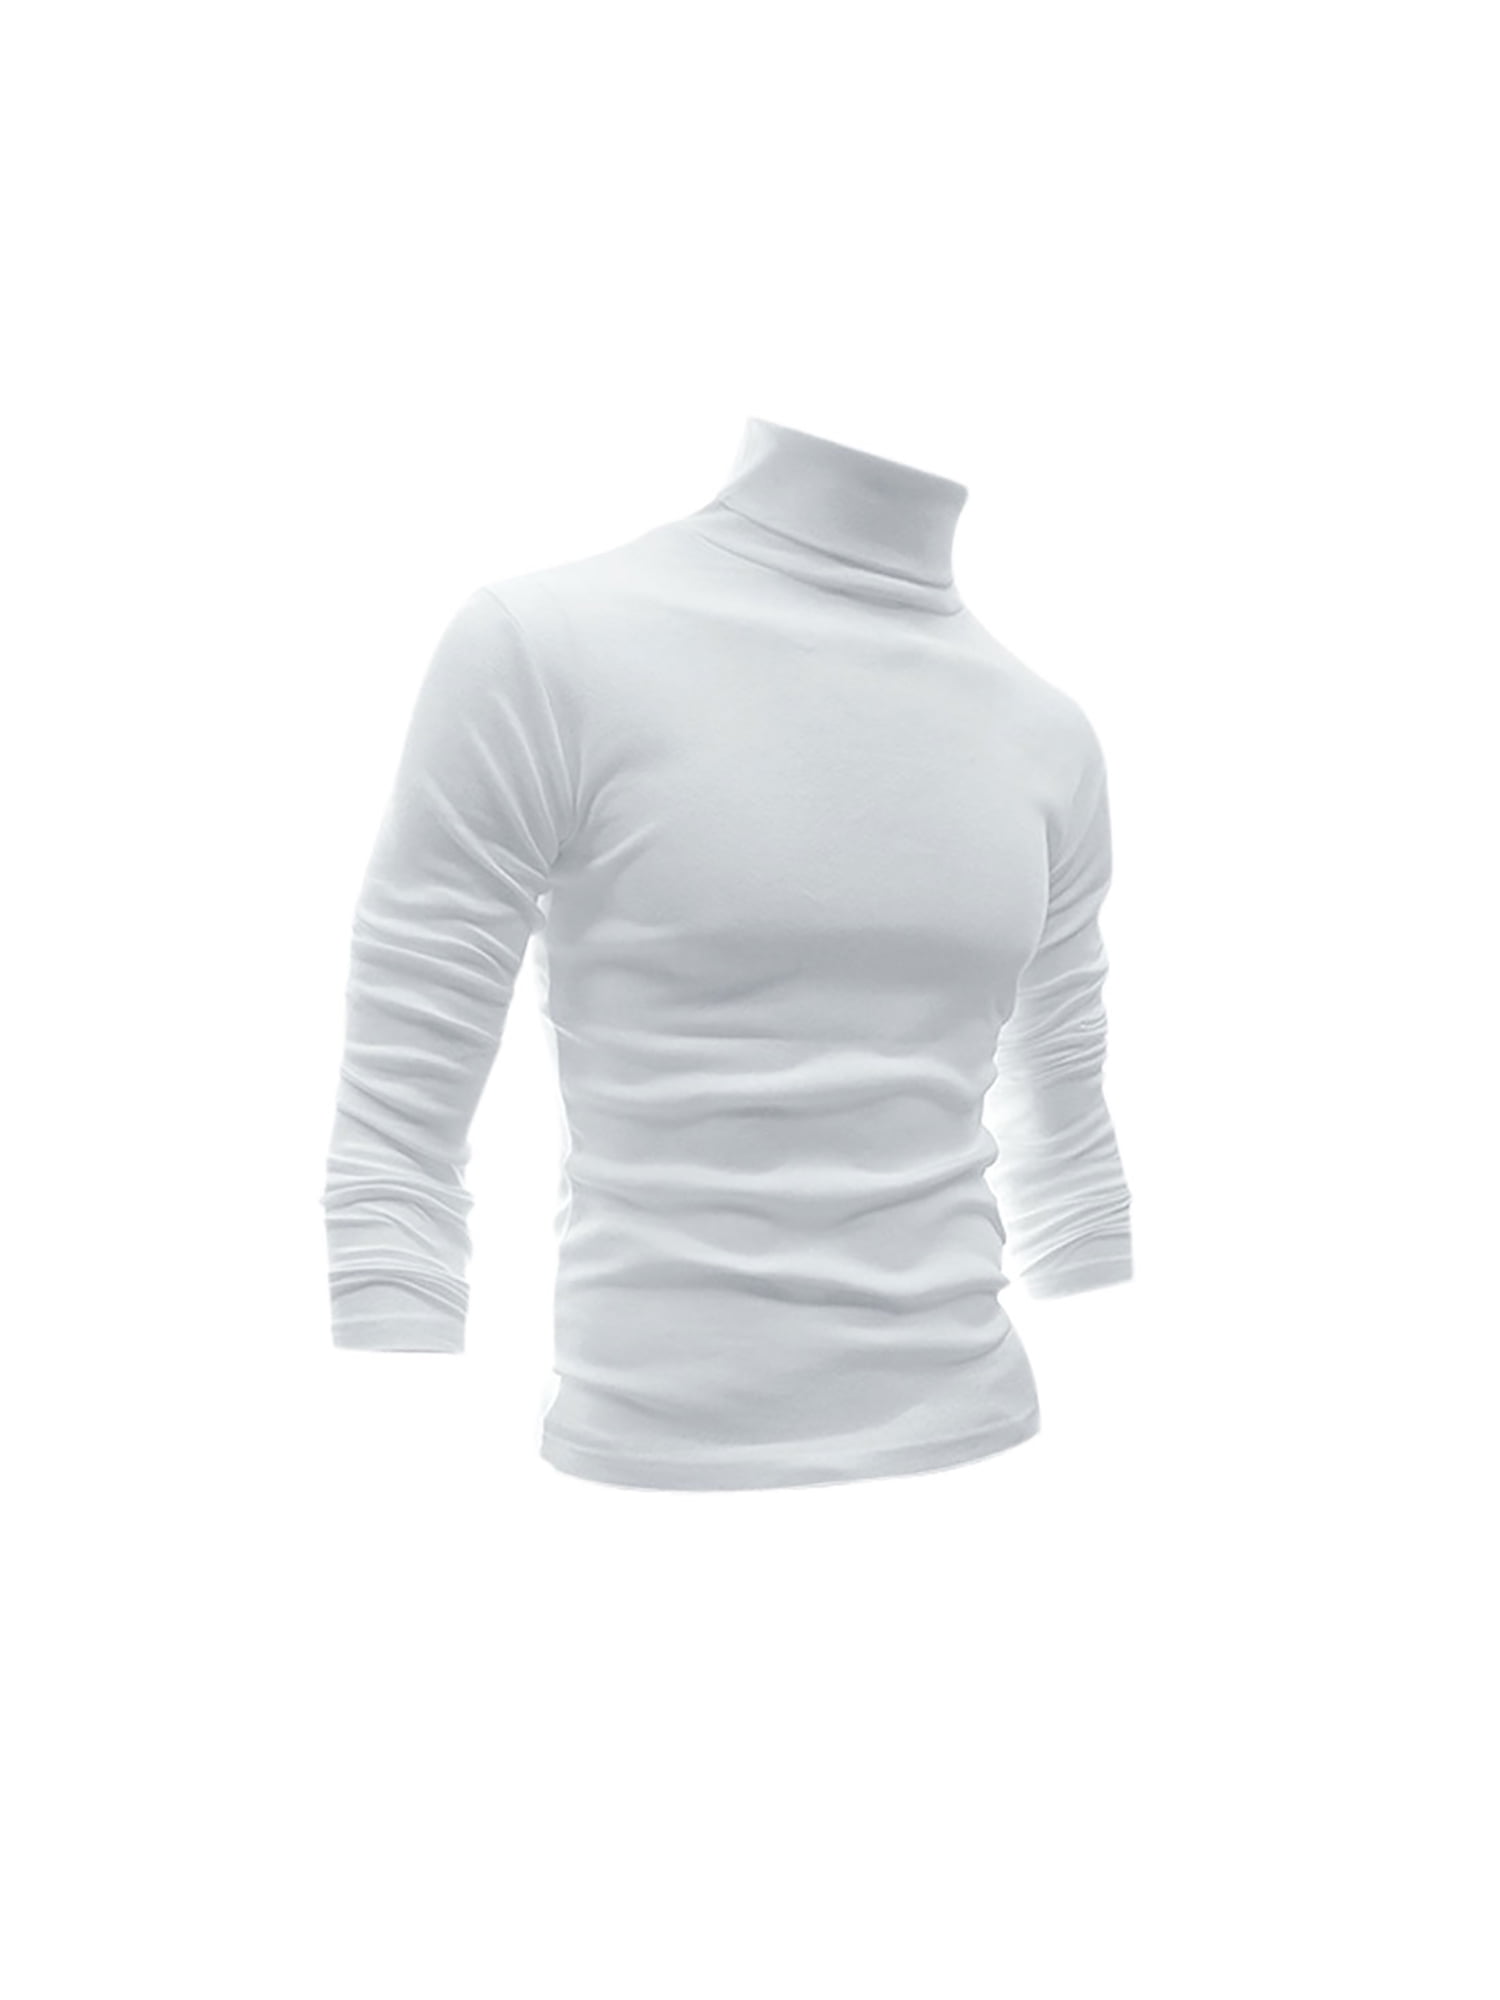 jonivey Mens Basic Turtleneck Long Sleeve Solid Casual Knitted T-Shirt Pullover Tops